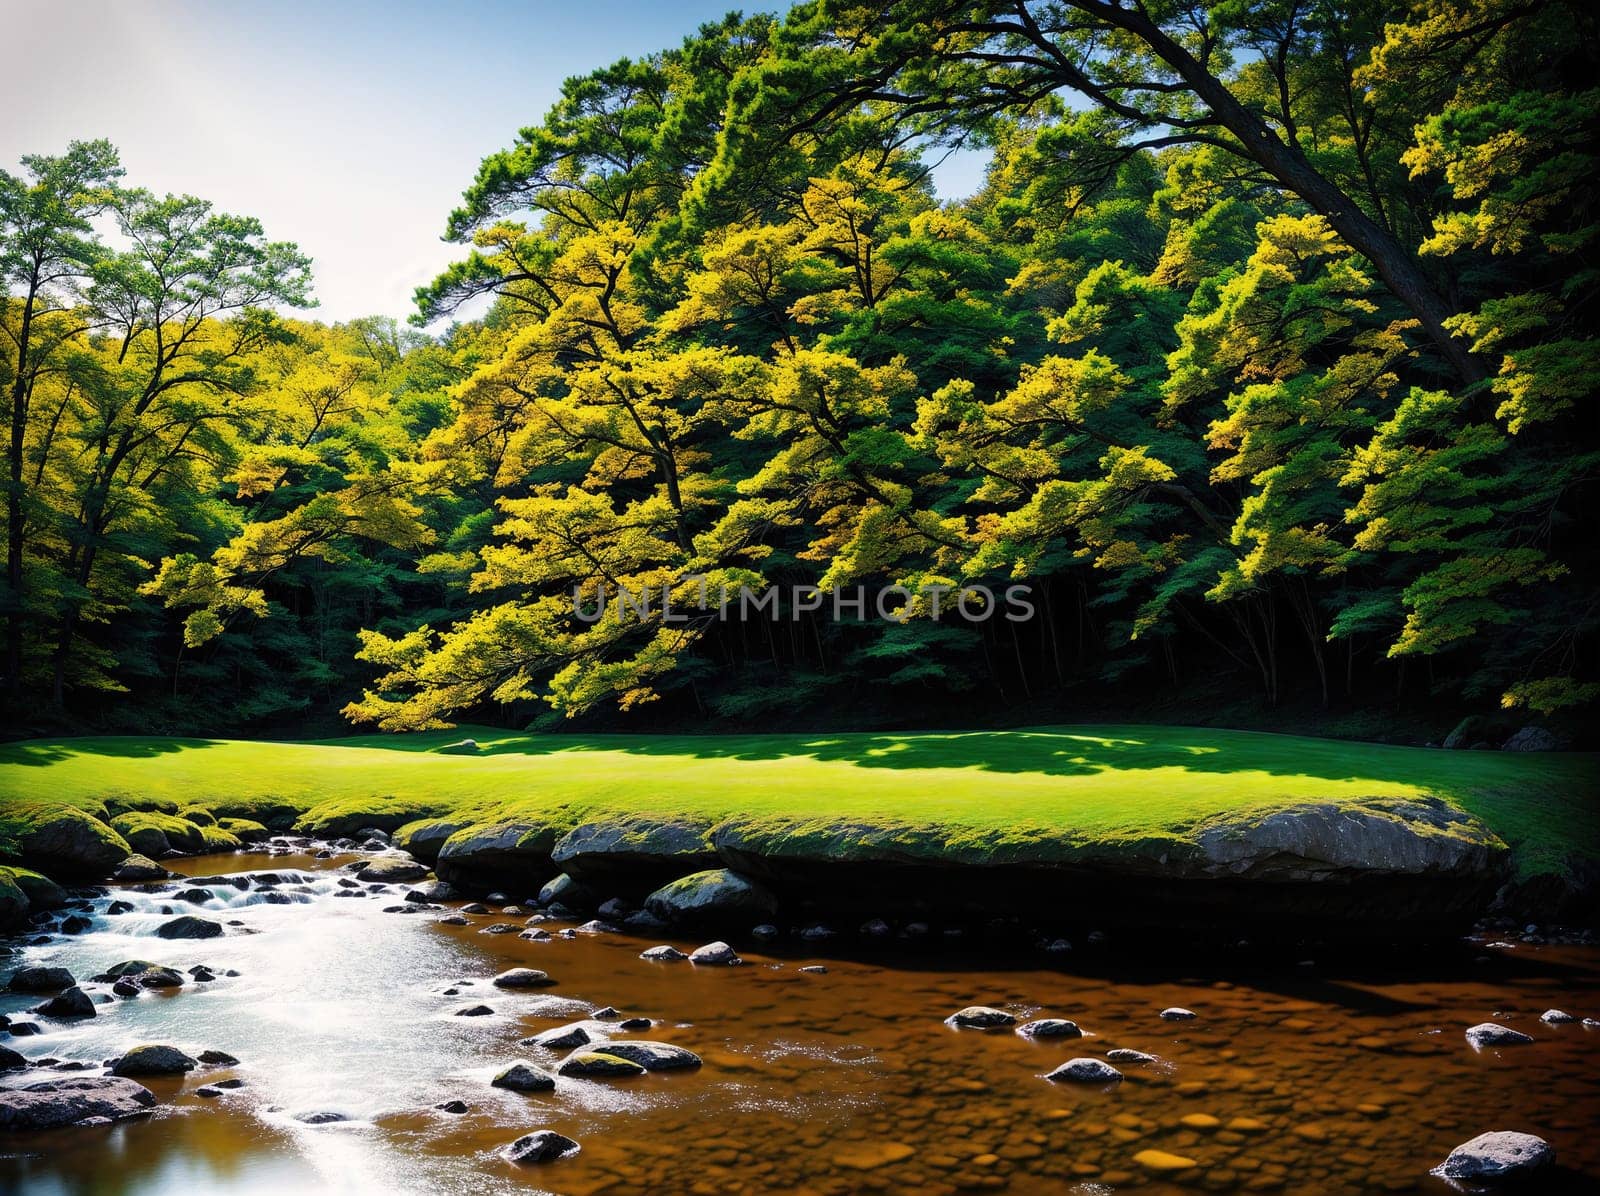 The image depicts a serene landscape with a small stream running through a lush green forest, surrounded by tall trees and rocks.